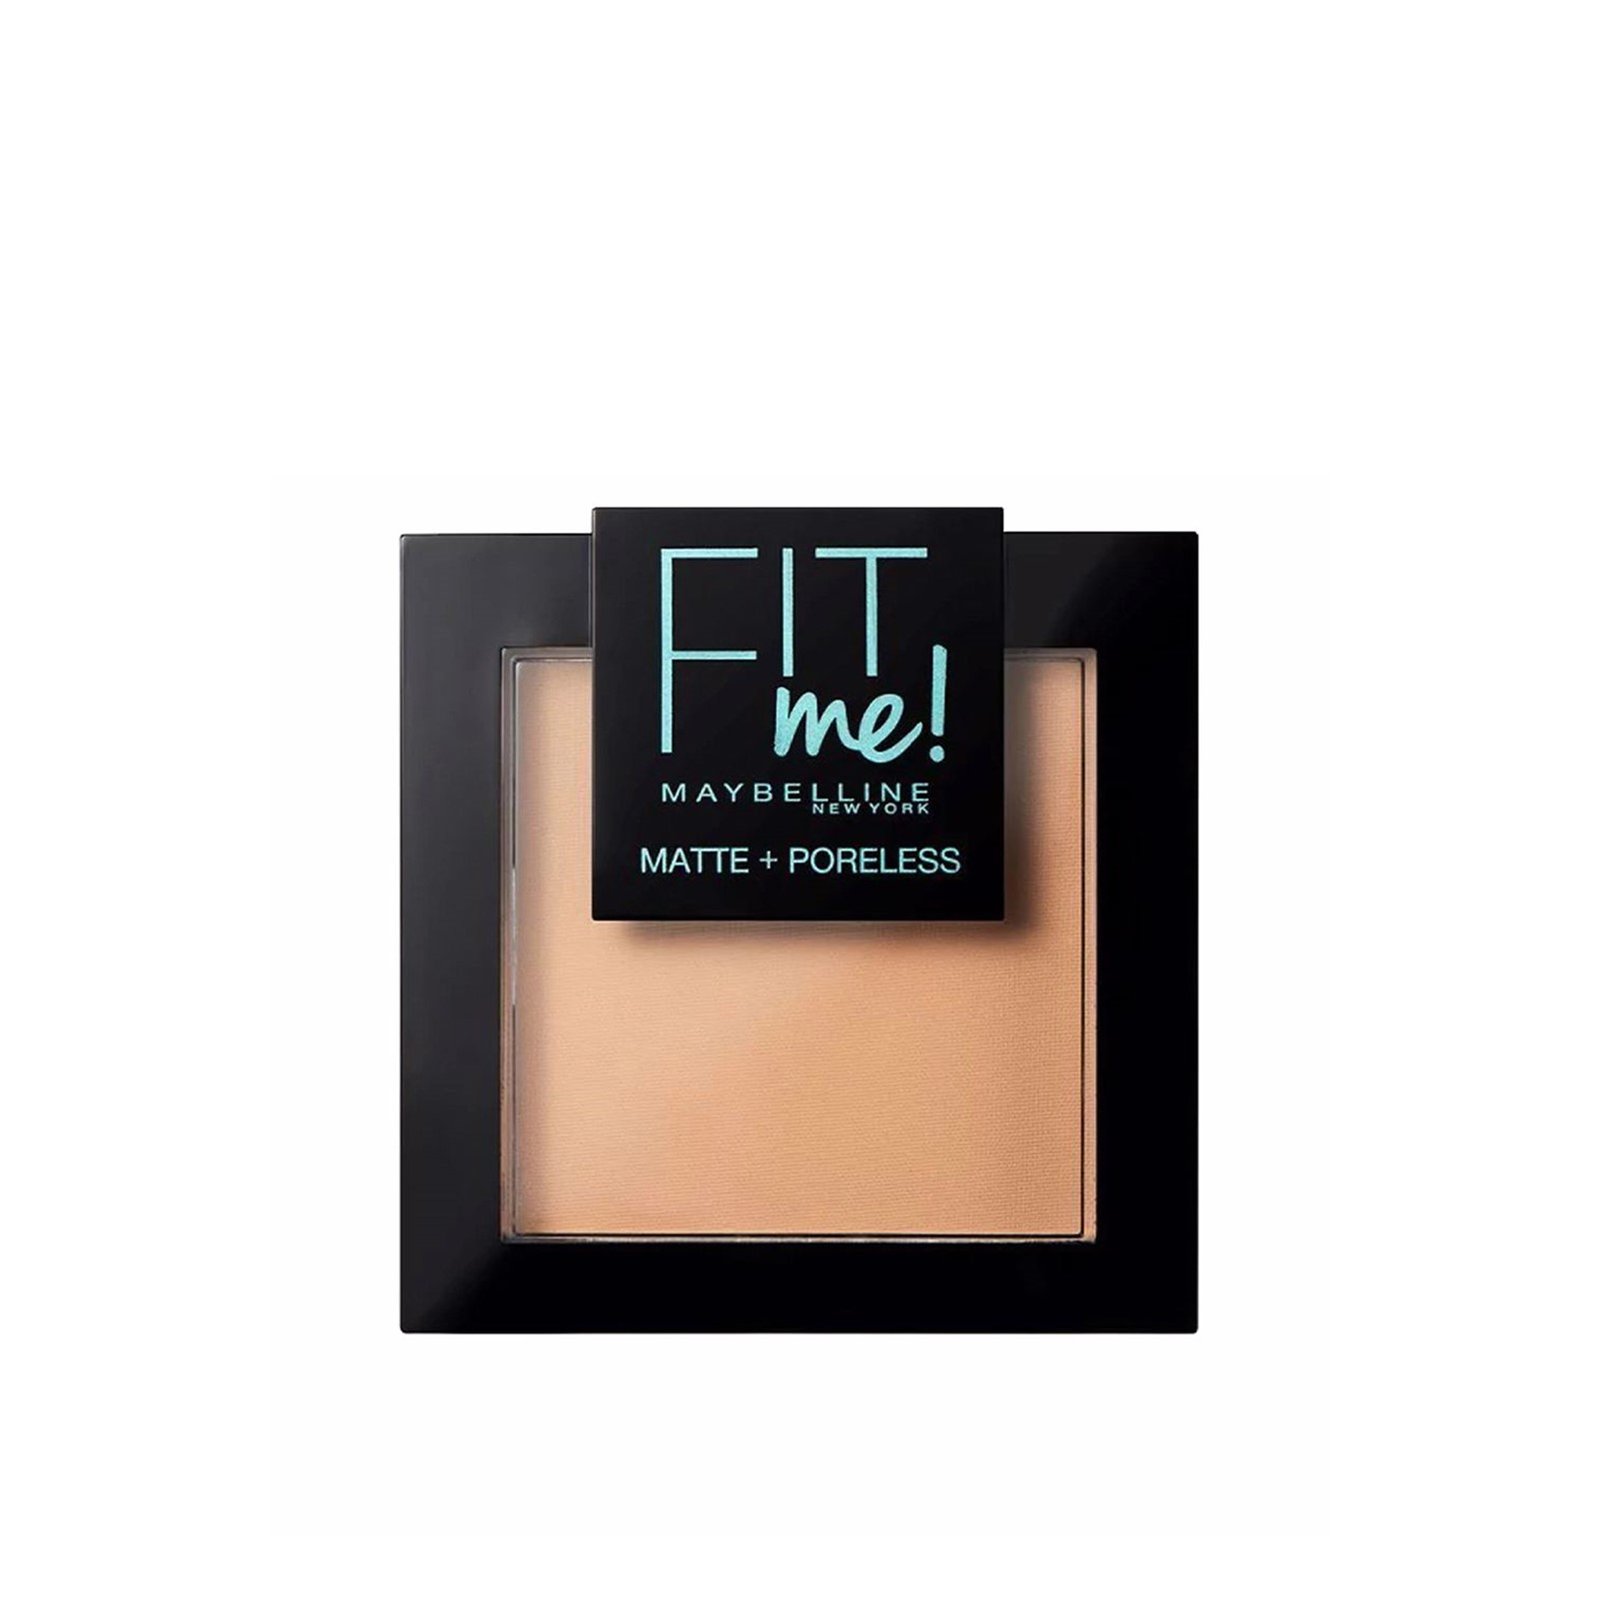 Maybelline New York Fit Me Shade 220 Natural Beige, Compact Powder, 8g -  Powder that Protects Skin from Sun, Absorbs Oil, Sweat and helps you to  stay